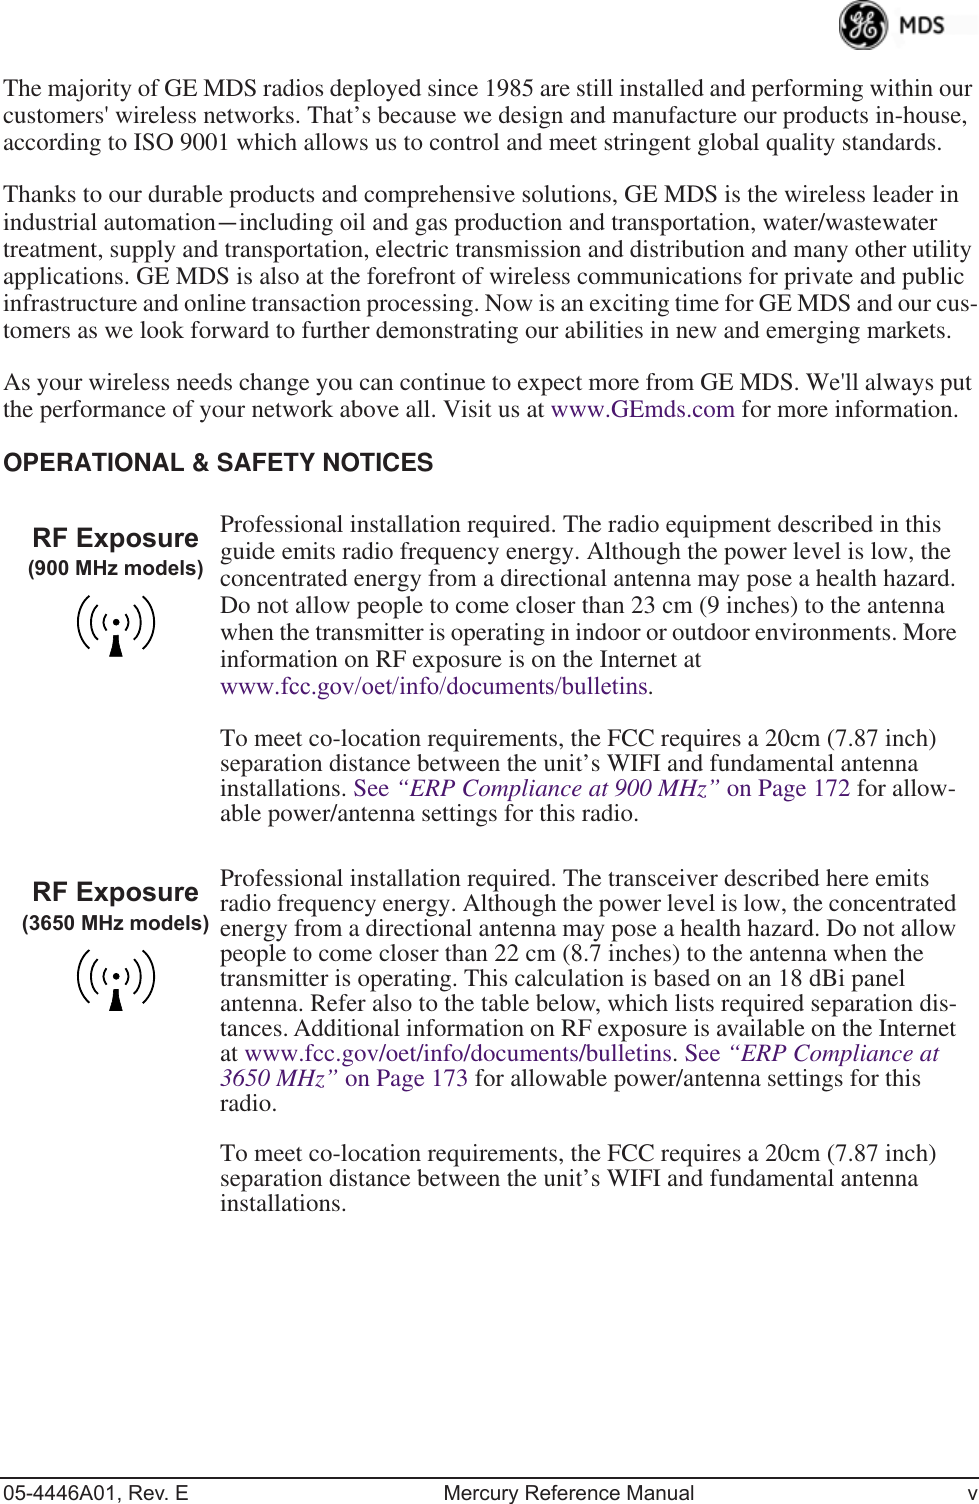  05-4446A01, Rev. E Mercury Reference Manual v The majority of GE MDS radios deployed since 1985 are still installed and performing within our customers&apos; wireless networks. That’s because we design and manufacture our products in-house, according to ISO 9001 which allows us to control and meet stringent global quality standards. Thanks to our durable products and comprehensive solutions, GE MDS is the wireless leader in industrial automation — including oil and gas production and transportation, water/wastewater treatment, supply and transportation, electric transmission and distribution and many other utility applications. GE MDS is also at the forefront of wireless communications for private and public infrastructure and online transaction processing. Now is an exciting time for GE MDS and our cus-tomers as we look forward to further demonstrating our abilities in new and emerging markets.As your wireless needs change you can continue to expect more from GE MDS. We&apos;ll always put the performance of your network above all. Visit us at www.GEmds.com for more information. OPERATIONAL &amp; SAFETY NOTICES Professional installation required. The radio equipment described in this guide emits radio frequency energy. Although the power level is low, the concentrated energy from a directional antenna may pose a health hazard. Do not allow people to come closer than 23 cm (9 inches) to the antenna when the transmitter is operating in indoor or outdoor environments. More information on RF exposure is on the Internet at  www.fcc.gov/oet/info/documents/bulletins .To meet co-location requirements, the FCC requires a 20cm (7.87 inch) separation distance between the unit’s WIFI and fundamental antenna installations. See  “ERP Compliance at 900 MHz”  on Page 172 for allow-able power/antenna settings for this radio.Professional installation required. The transceiver described here emits radio frequency energy. Although the power level is low, the concentrated energy from a directional antenna may pose a health hazard. Do not allow people to come closer than 22 cm (8.7 inches) to the antenna when the transmitter is operating. This calculation is based on an 18 dBi panel antenna. Refer also to the table below, which lists required separation dis-tances. Additional information on RF exposure is available on the Internet at www.fcc.gov/oet/info/documents/bulletins. See  “ERP Compliance at 3650 MHz”  on Page 173 for allowable power/antenna settings for this radio.To meet co-location requirements, the FCC requires a 20cm (7.87 inch) separation distance between the unit’s WIFI and fundamental antenna installations.RF Exposure(900 MHz models)RF Exposure(3650 MHz models)